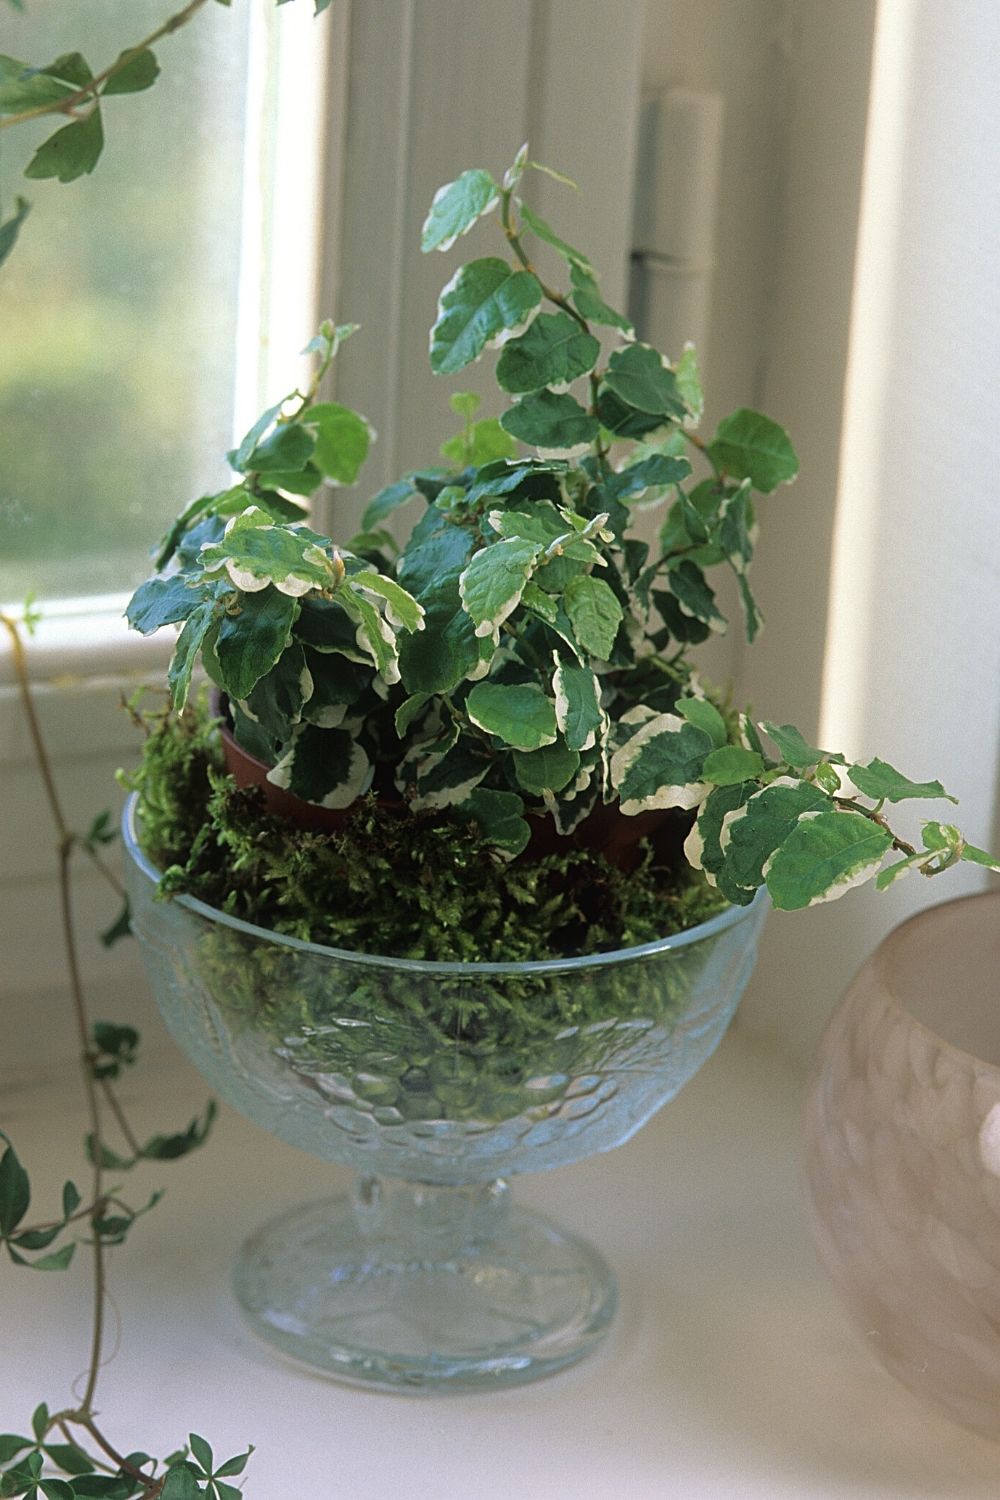 Creeping fig, if grown in a terrarium, closely resembles a forest